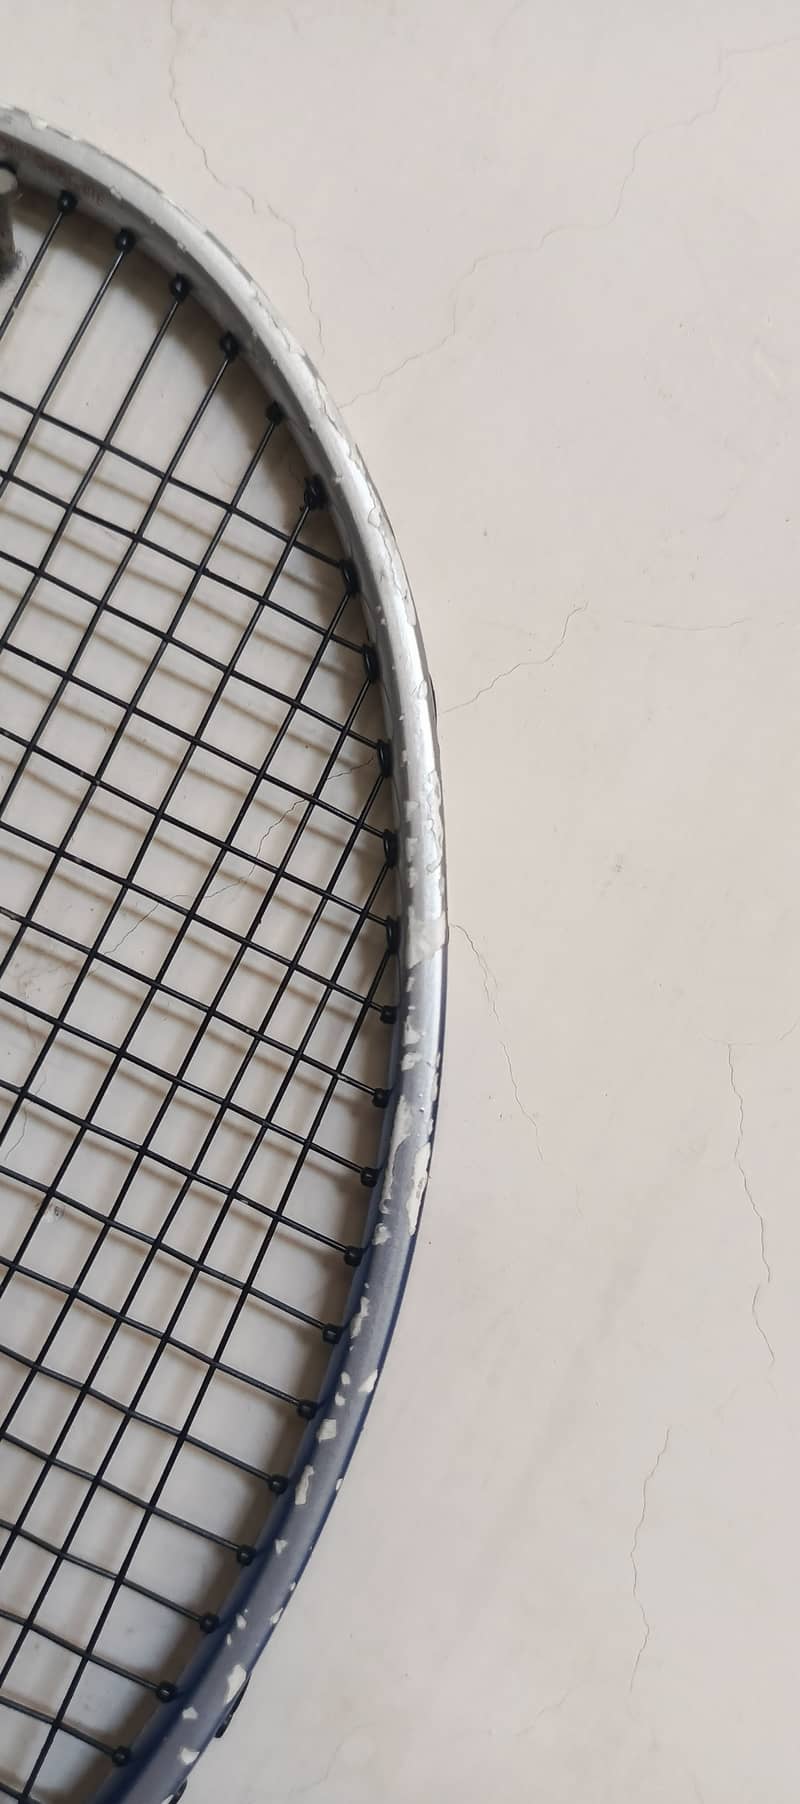 Badminton Racket | Hiqua 150 made in USA weight 84 tension 28 lbs 4